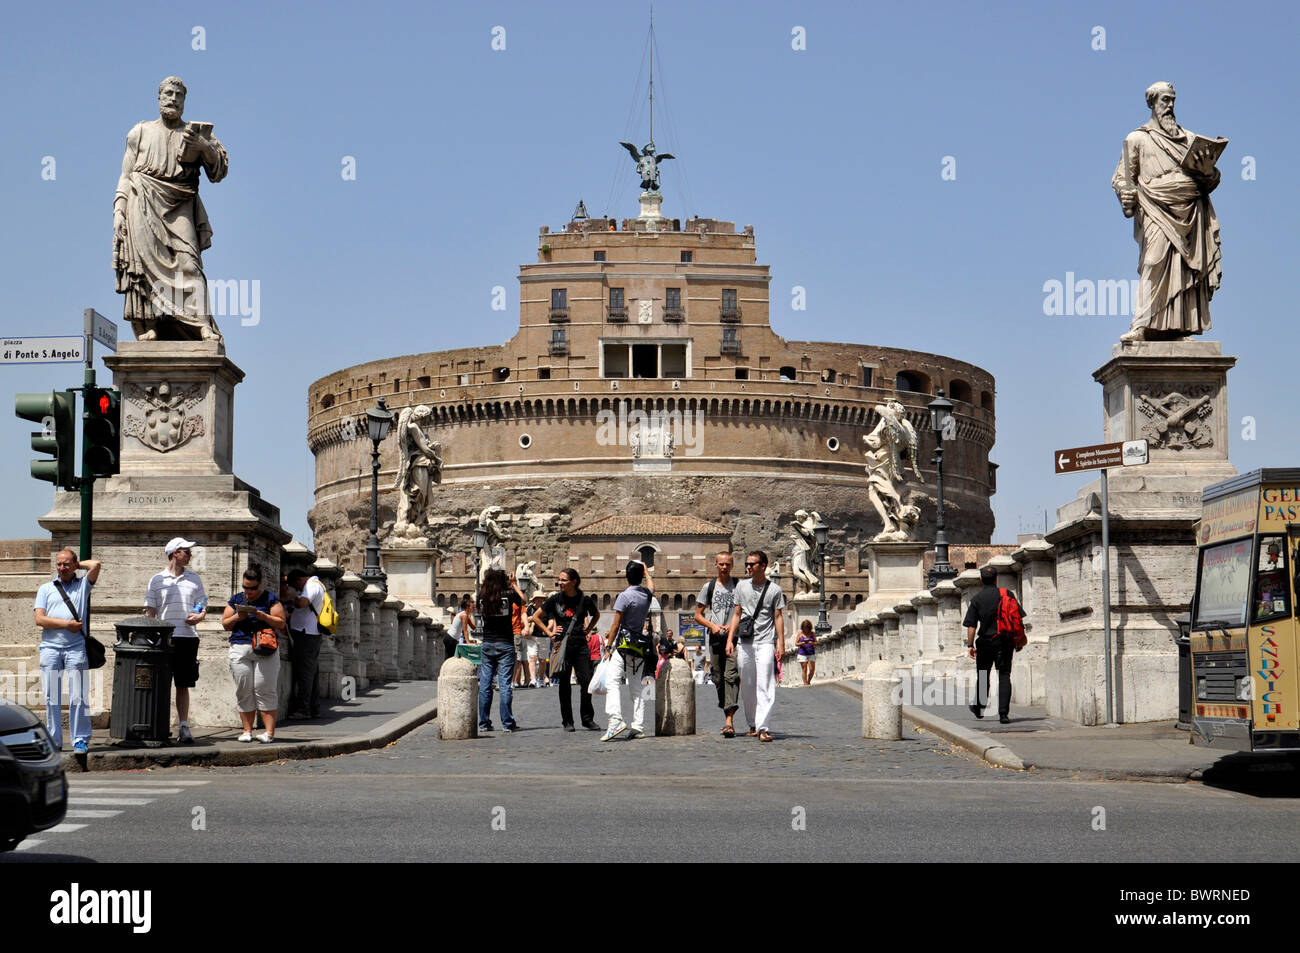 Statues of the apostles Peter and Paul, Ponte Sant'Angelo, Bridge of Angels, Castel Sant'Angelo, Castle of Angels, Rome, Lazio Stock Photo